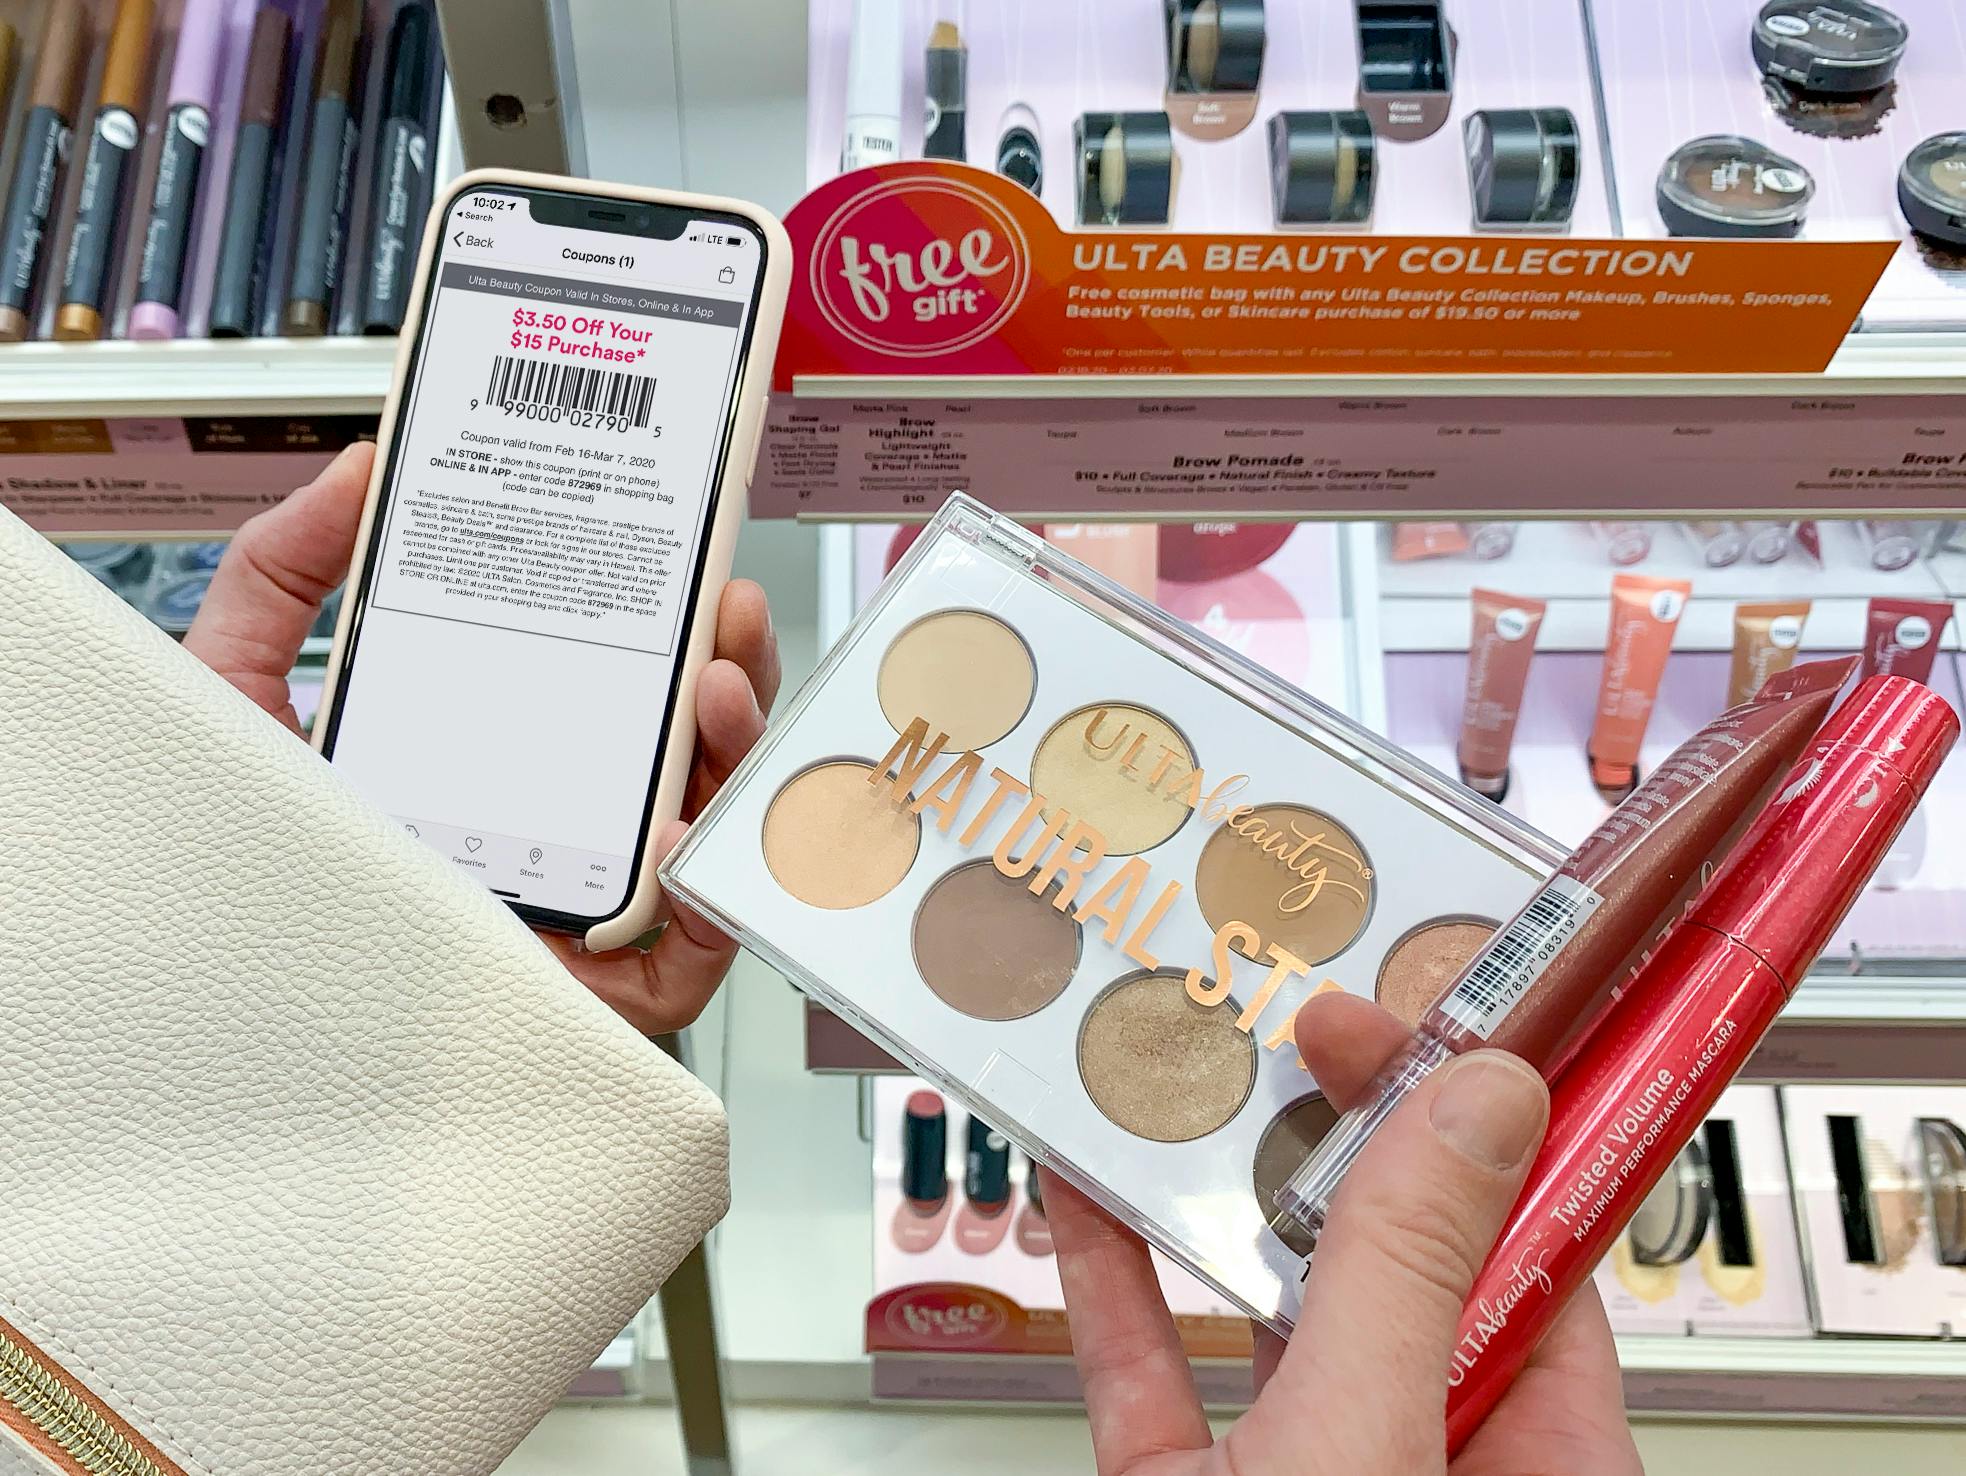 A person holding a cell phone displaying an Ulta coupon in one hand with a free gift makeup bag and Ulta Beauty cosmetics in the other hand.